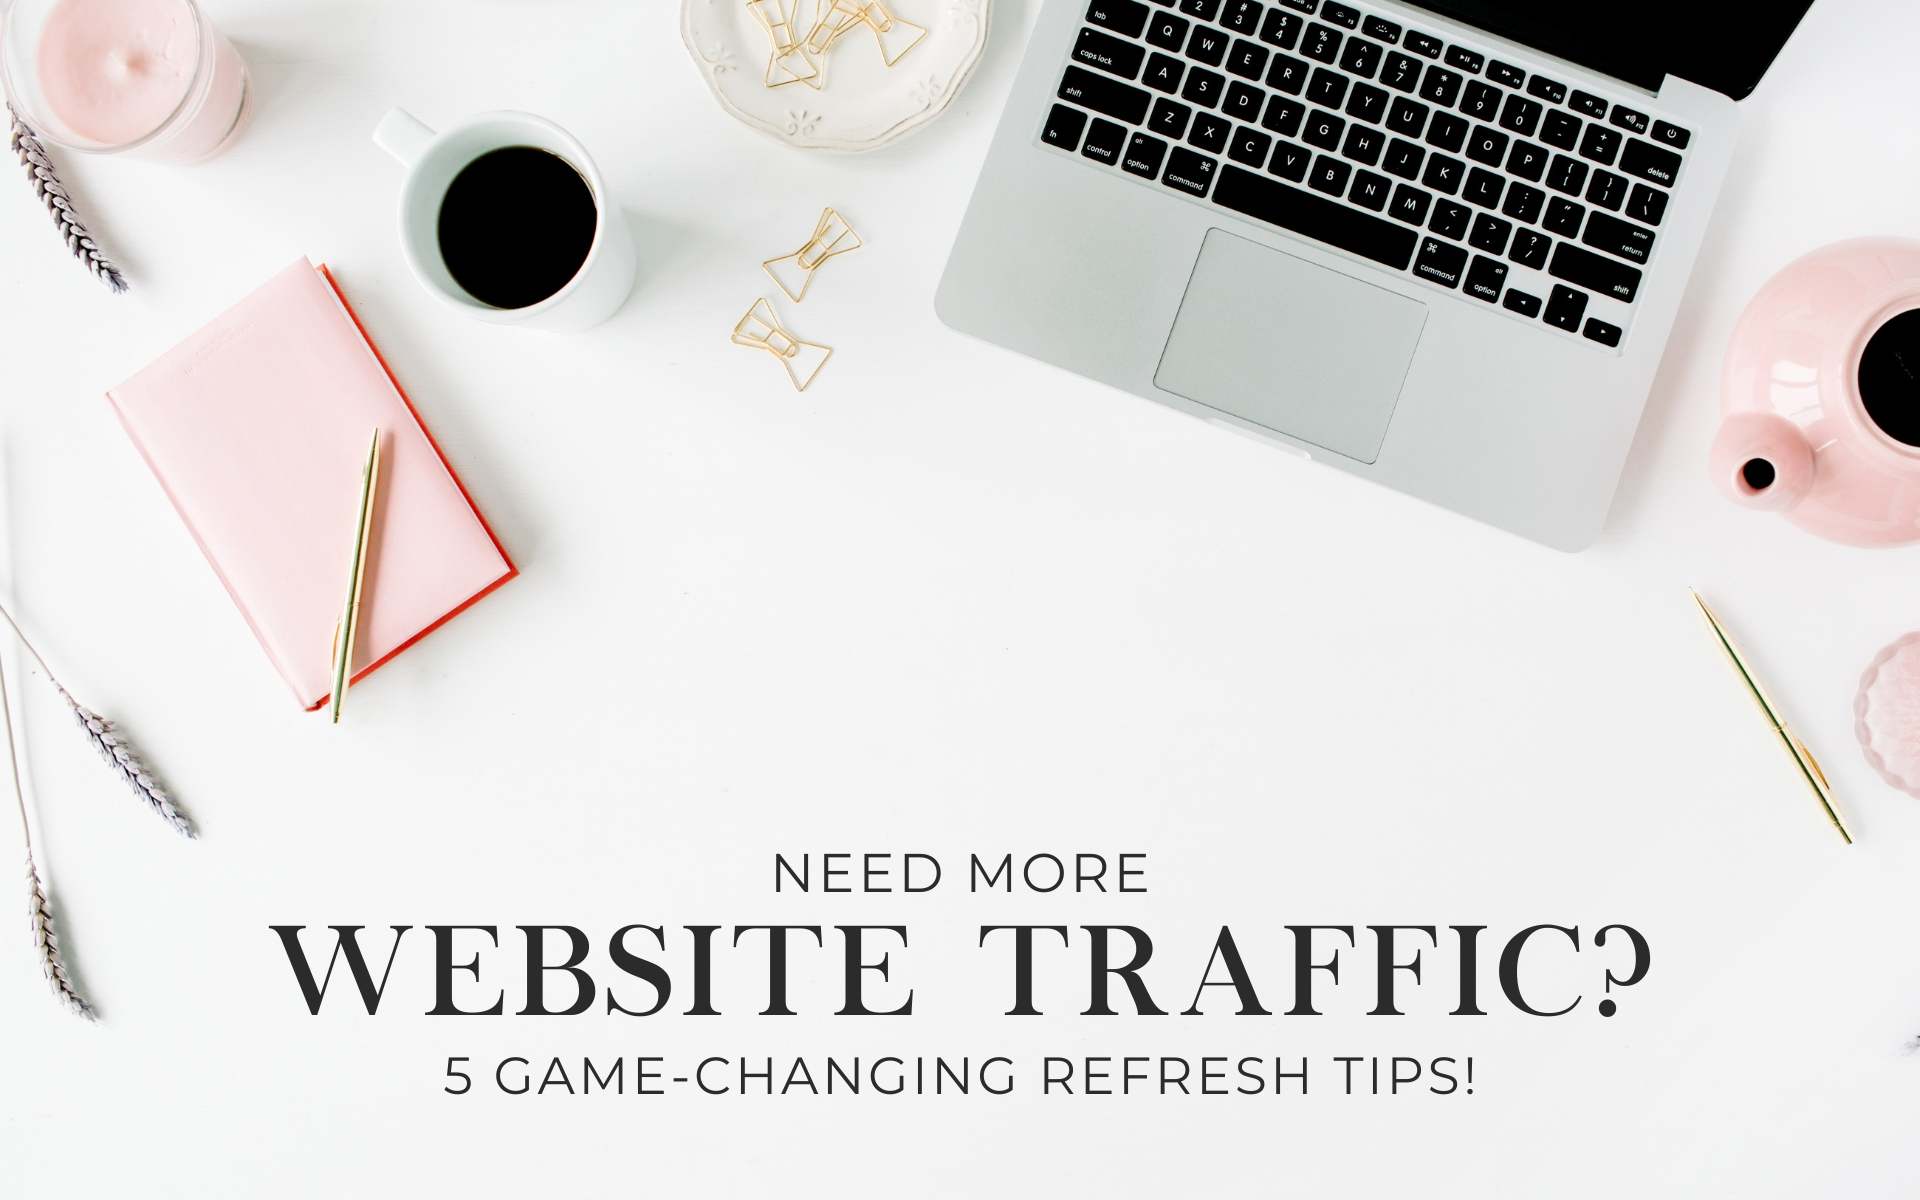 Need More Website Traffic? 5 Game-Changing Refresh Tips!